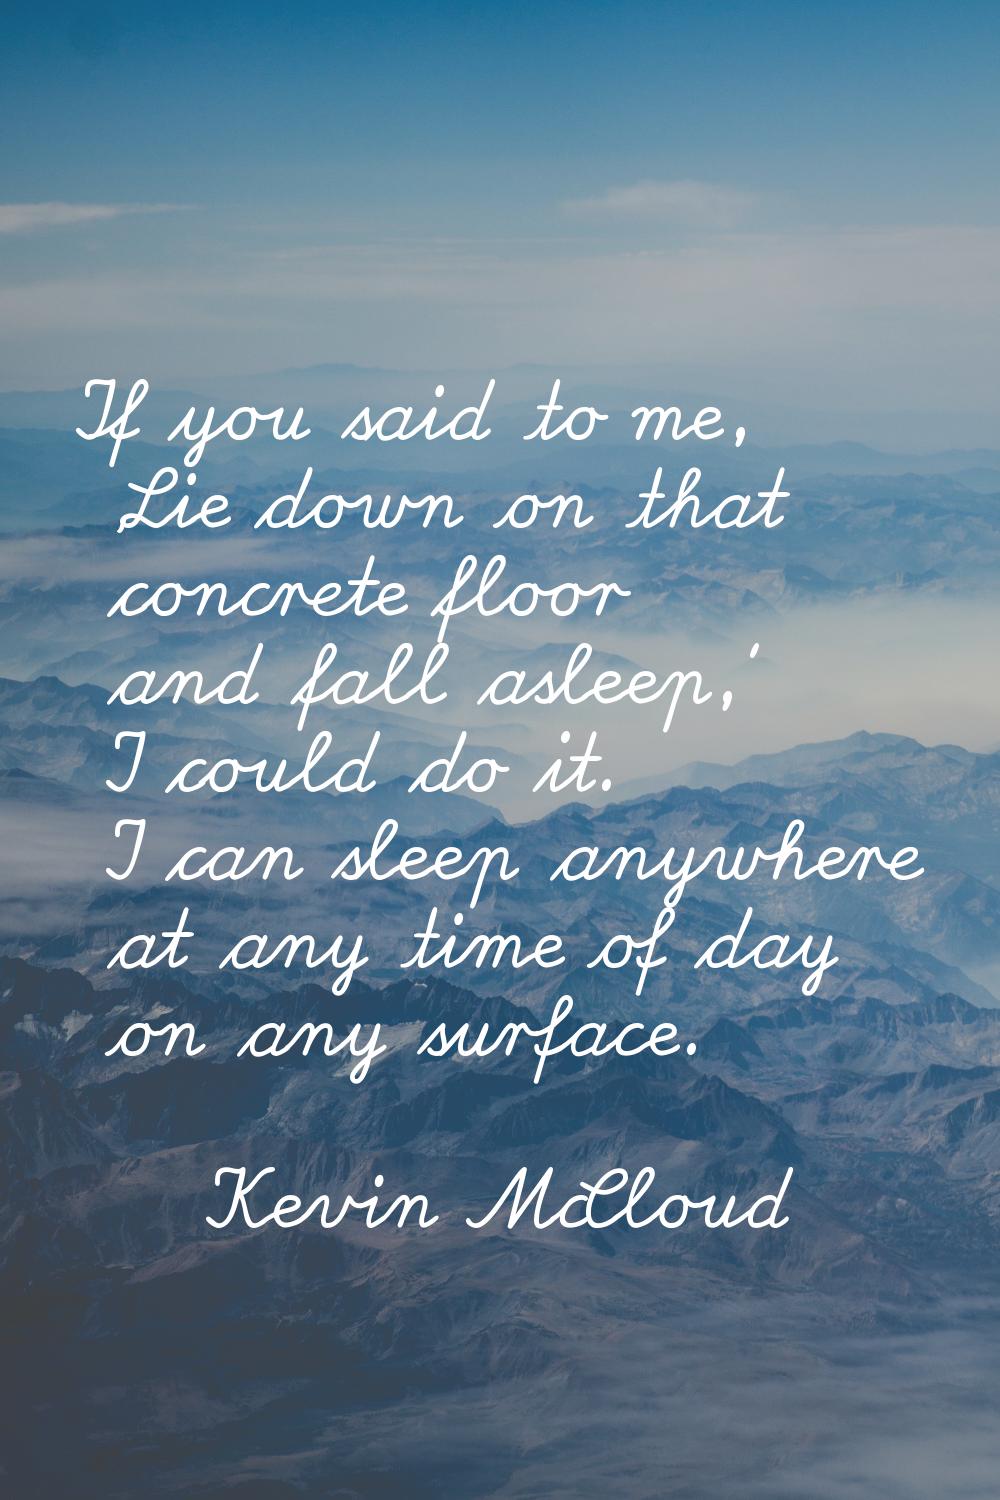 If you said to me, 'Lie down on that concrete floor and fall asleep,' I could do it. I can sleep an